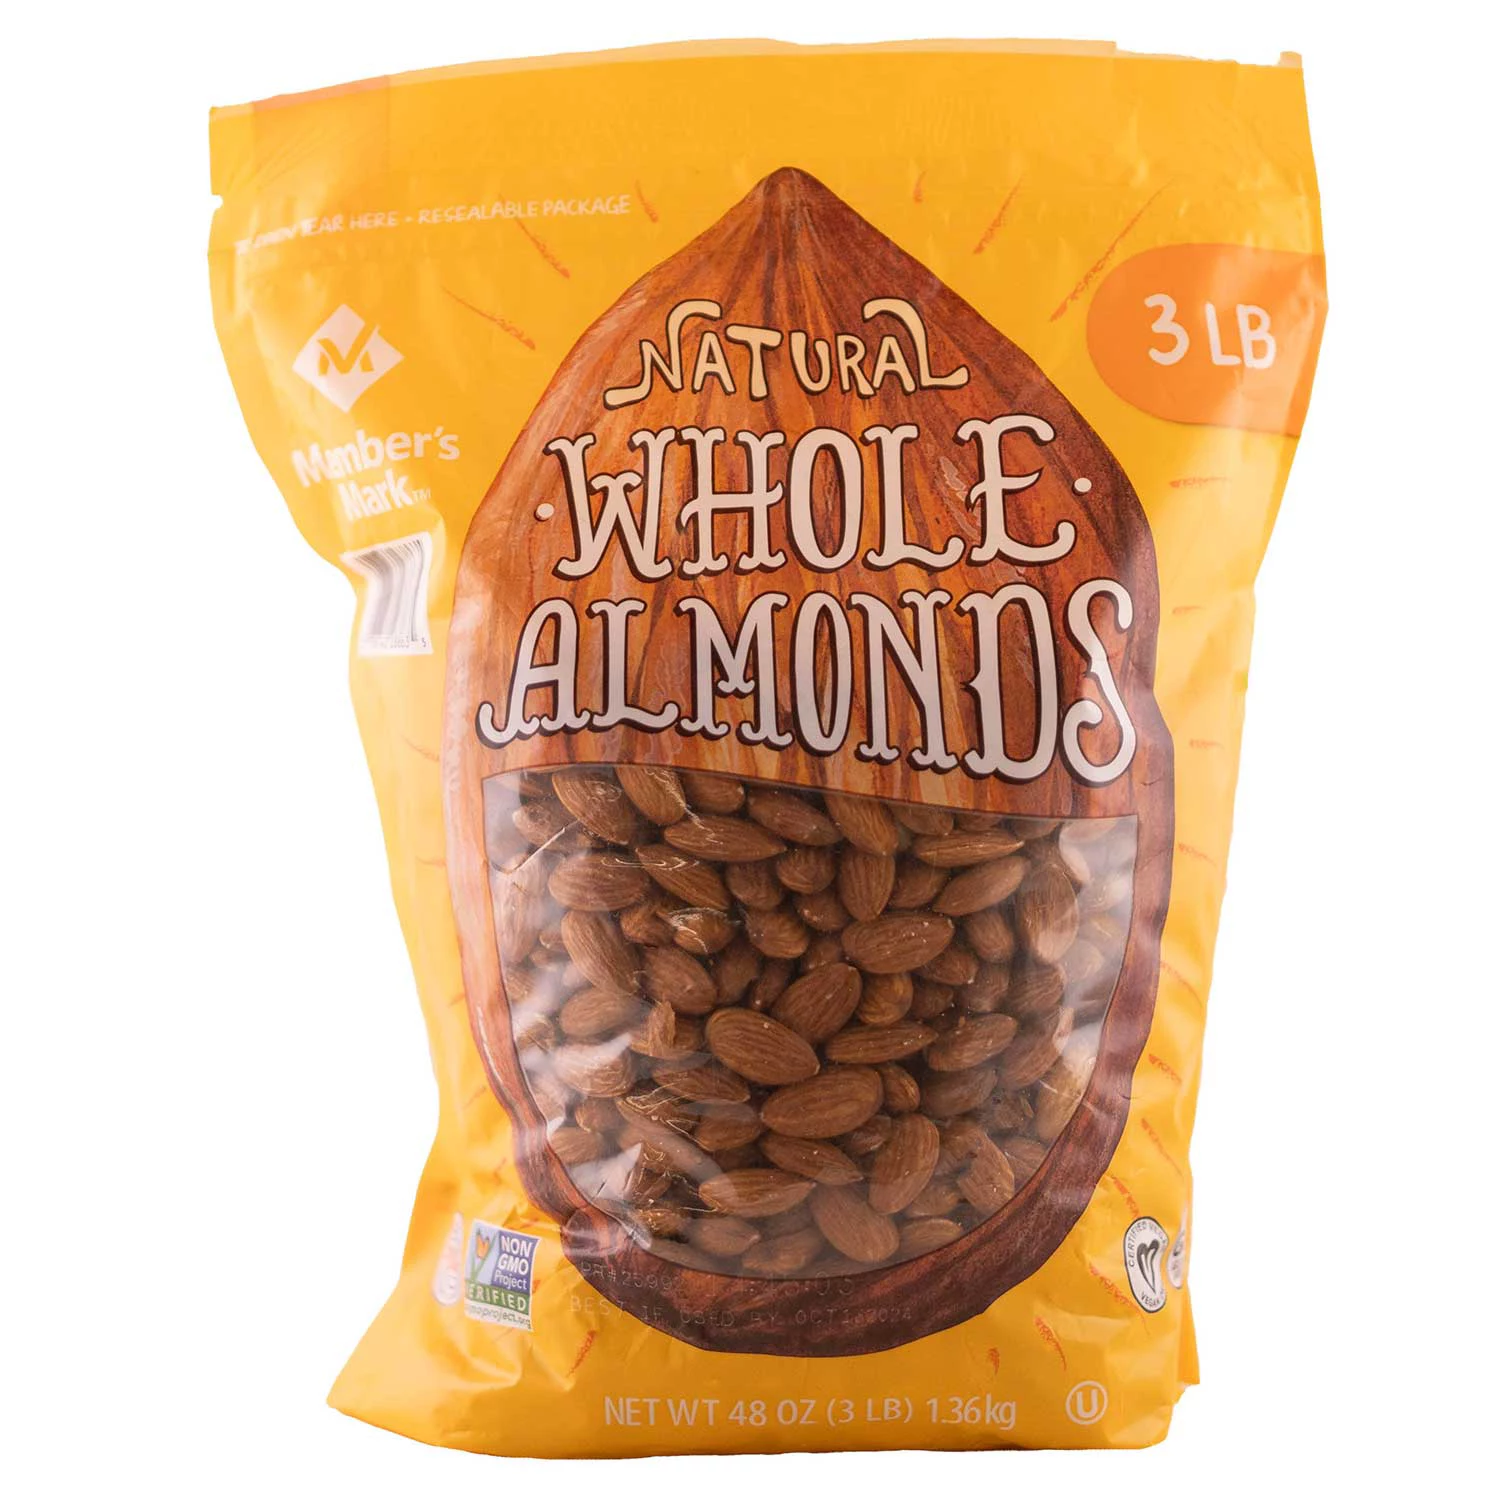 Member's Mark Natural Whole Almonds